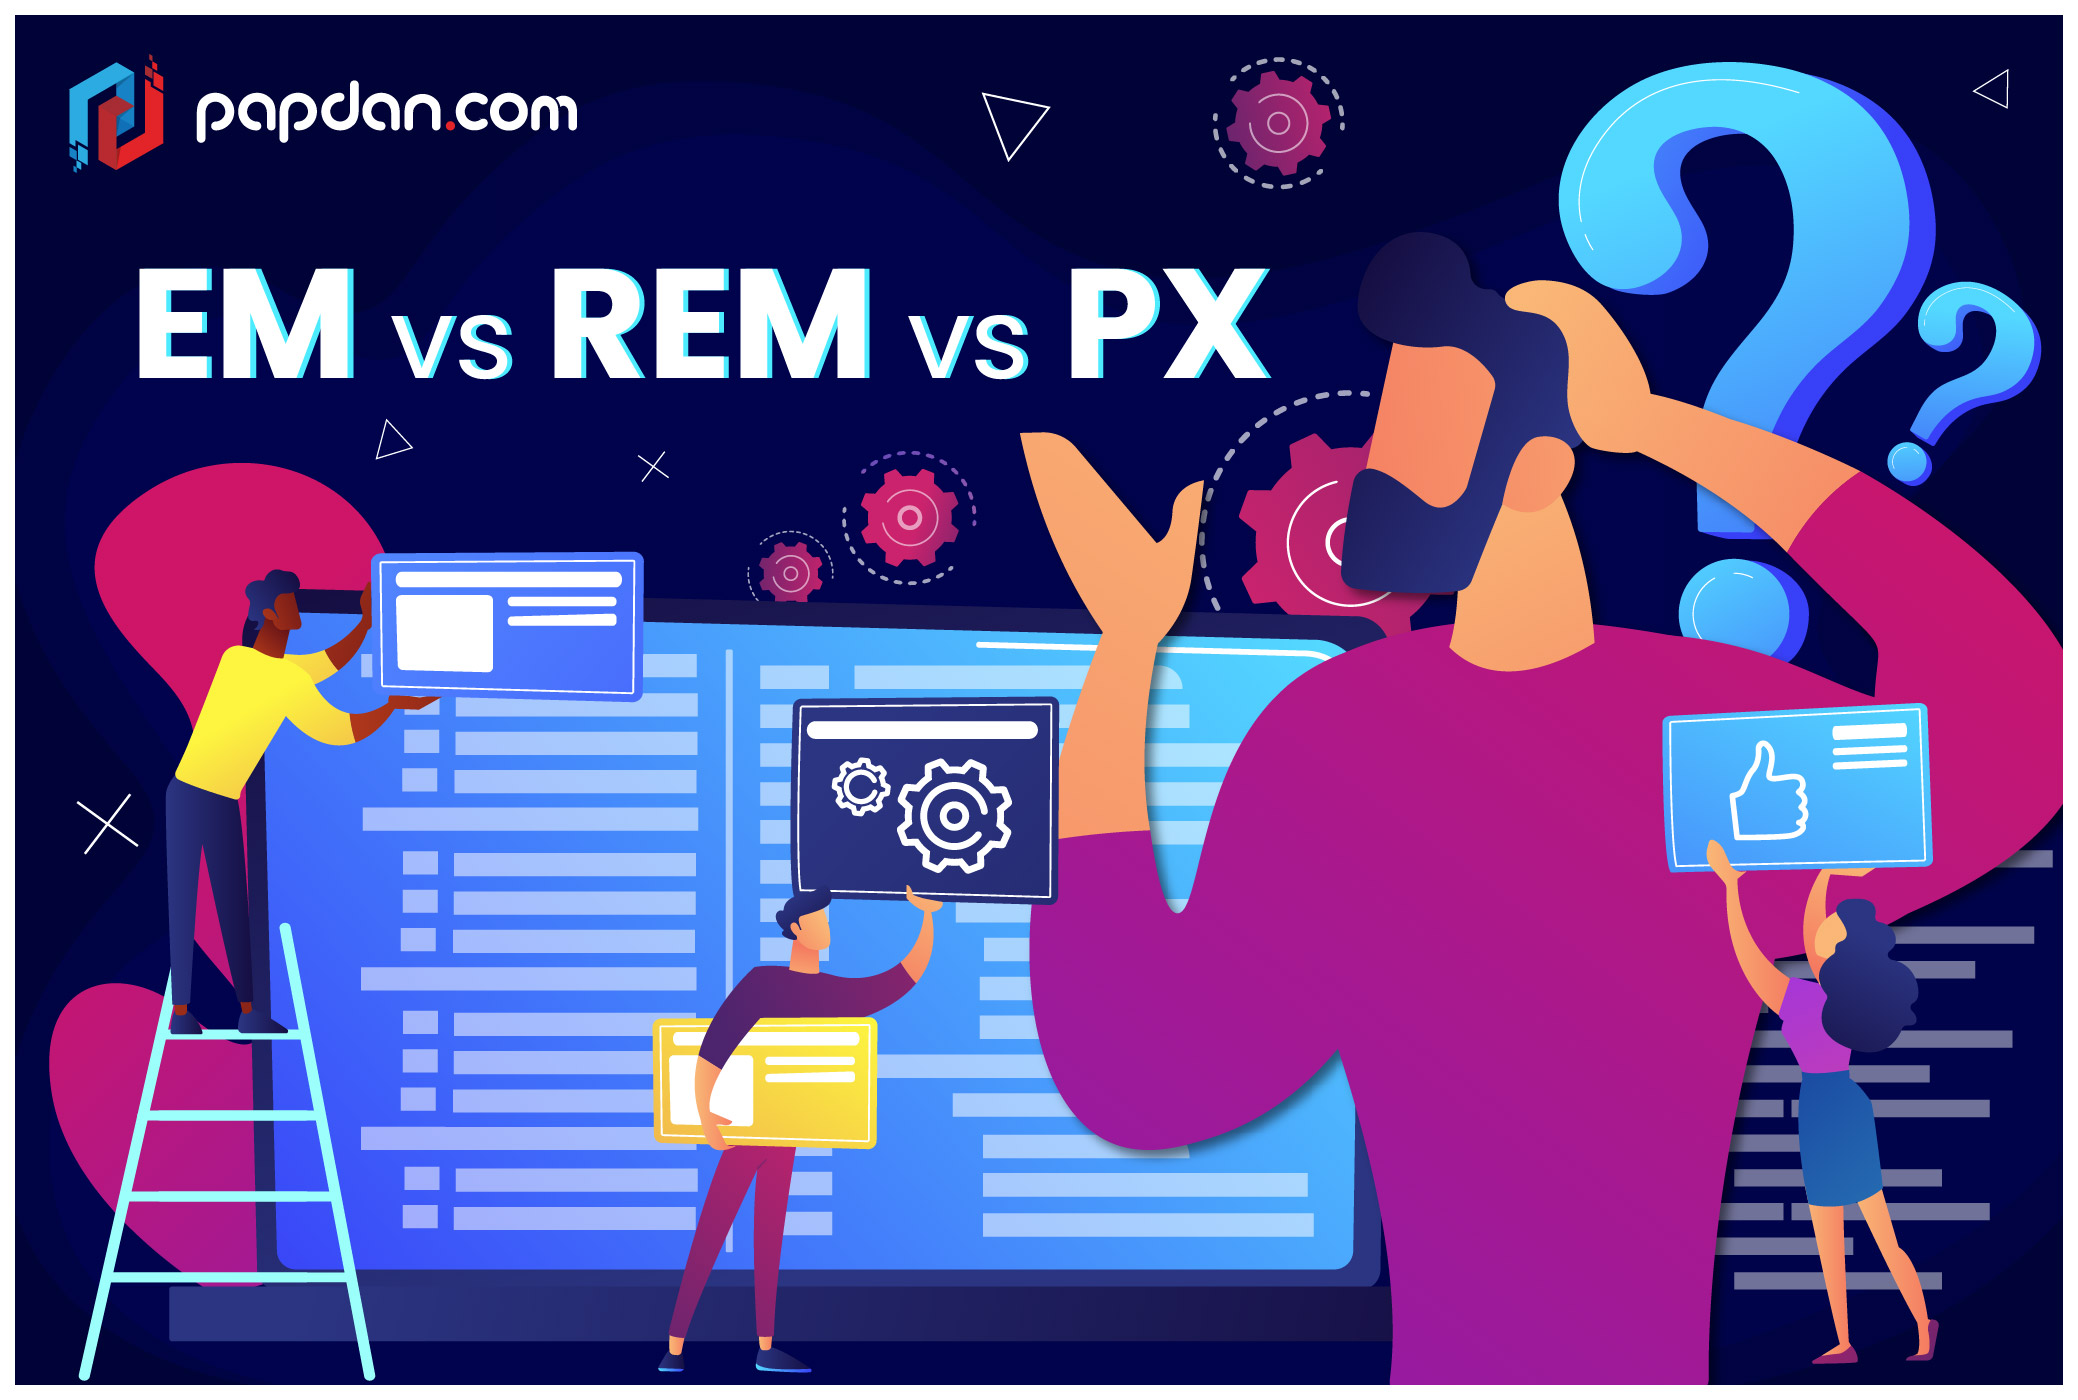 Which One is the Best: Pixels, Ems, or REMs?